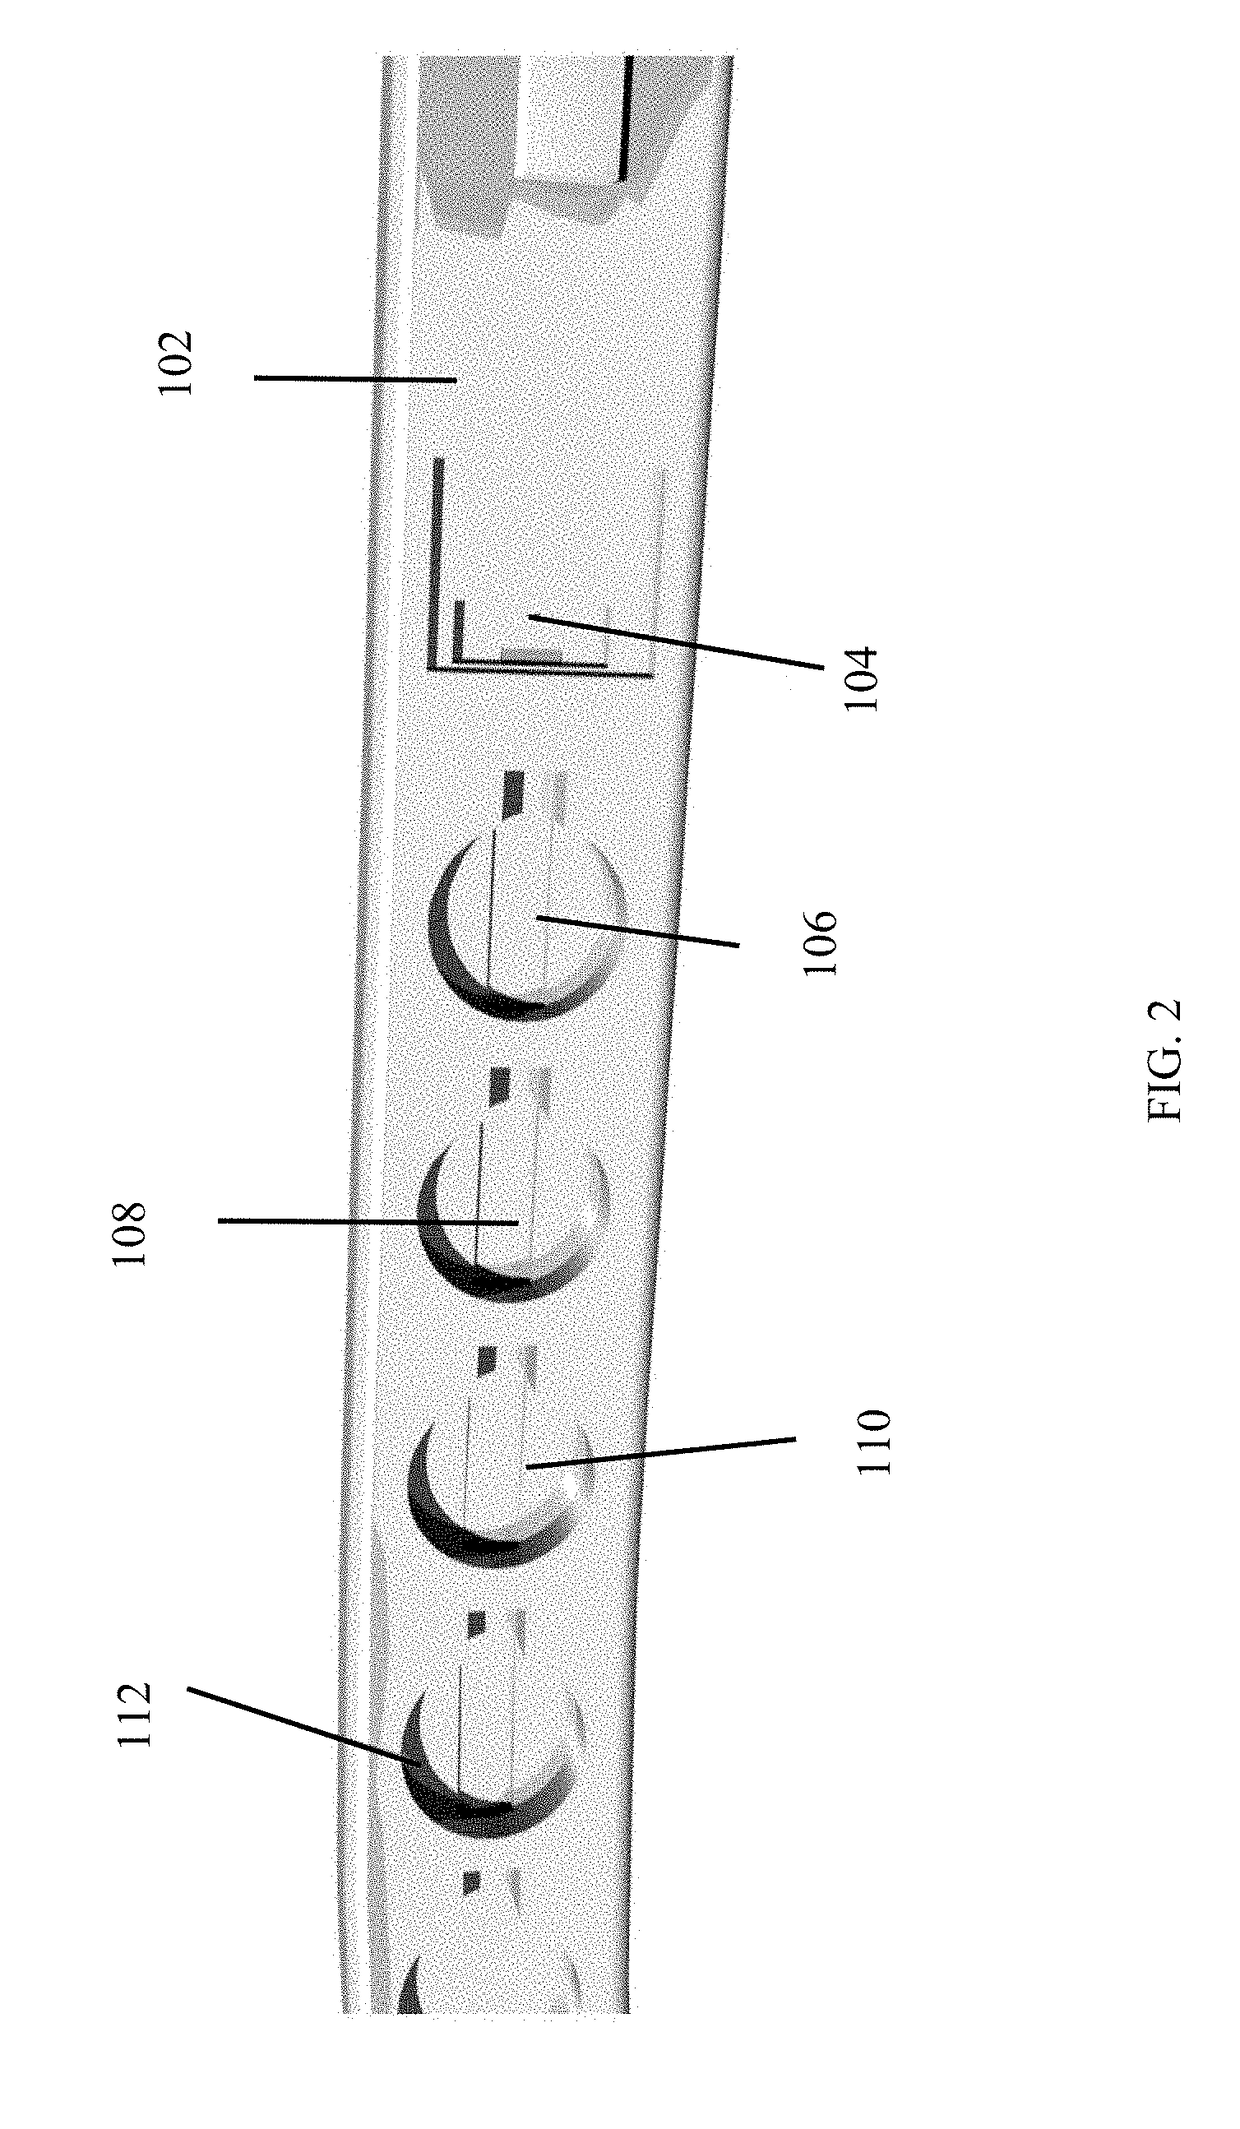 System and device for audio translation to tactile response